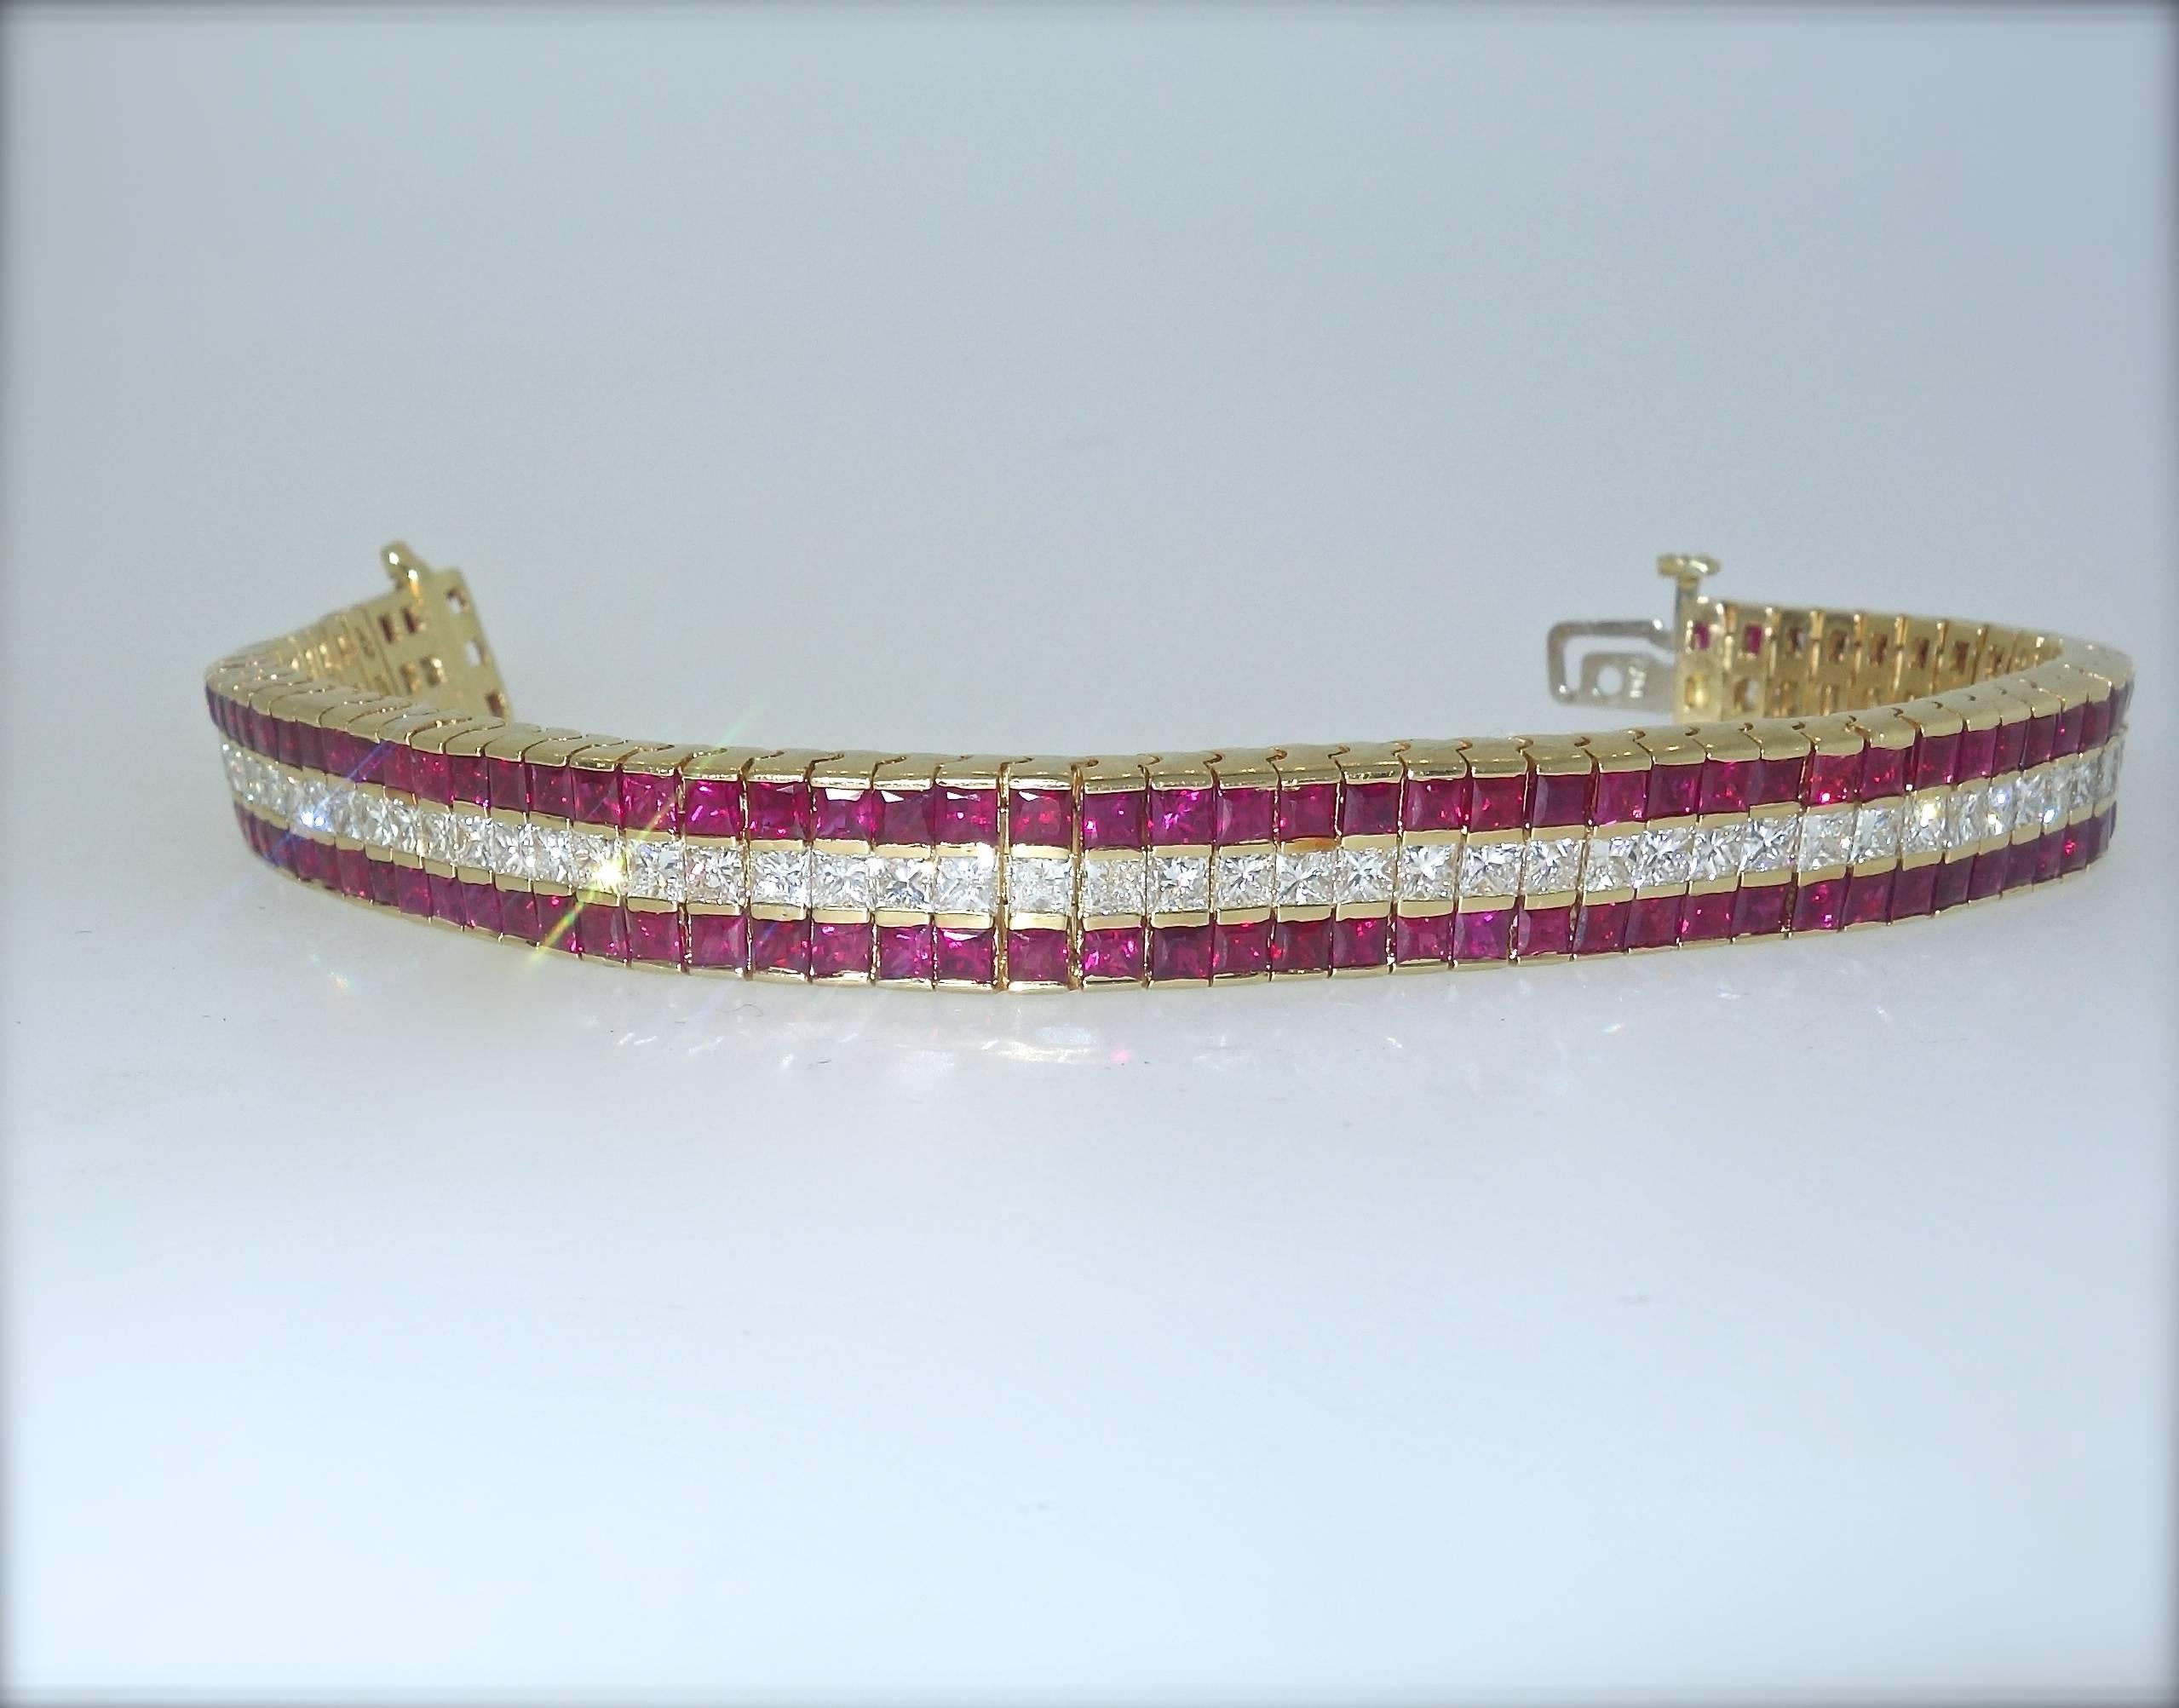 This flexible straight line bracelet possesses 66 fine white diamonds and 132 bright red rubies.  There are approximately 10 cts of diamonds and 20 cts of rubies.  The yellow gold piece weighs 27.5 grams.  It is 6 7/8 inches long and 3/8 inches in